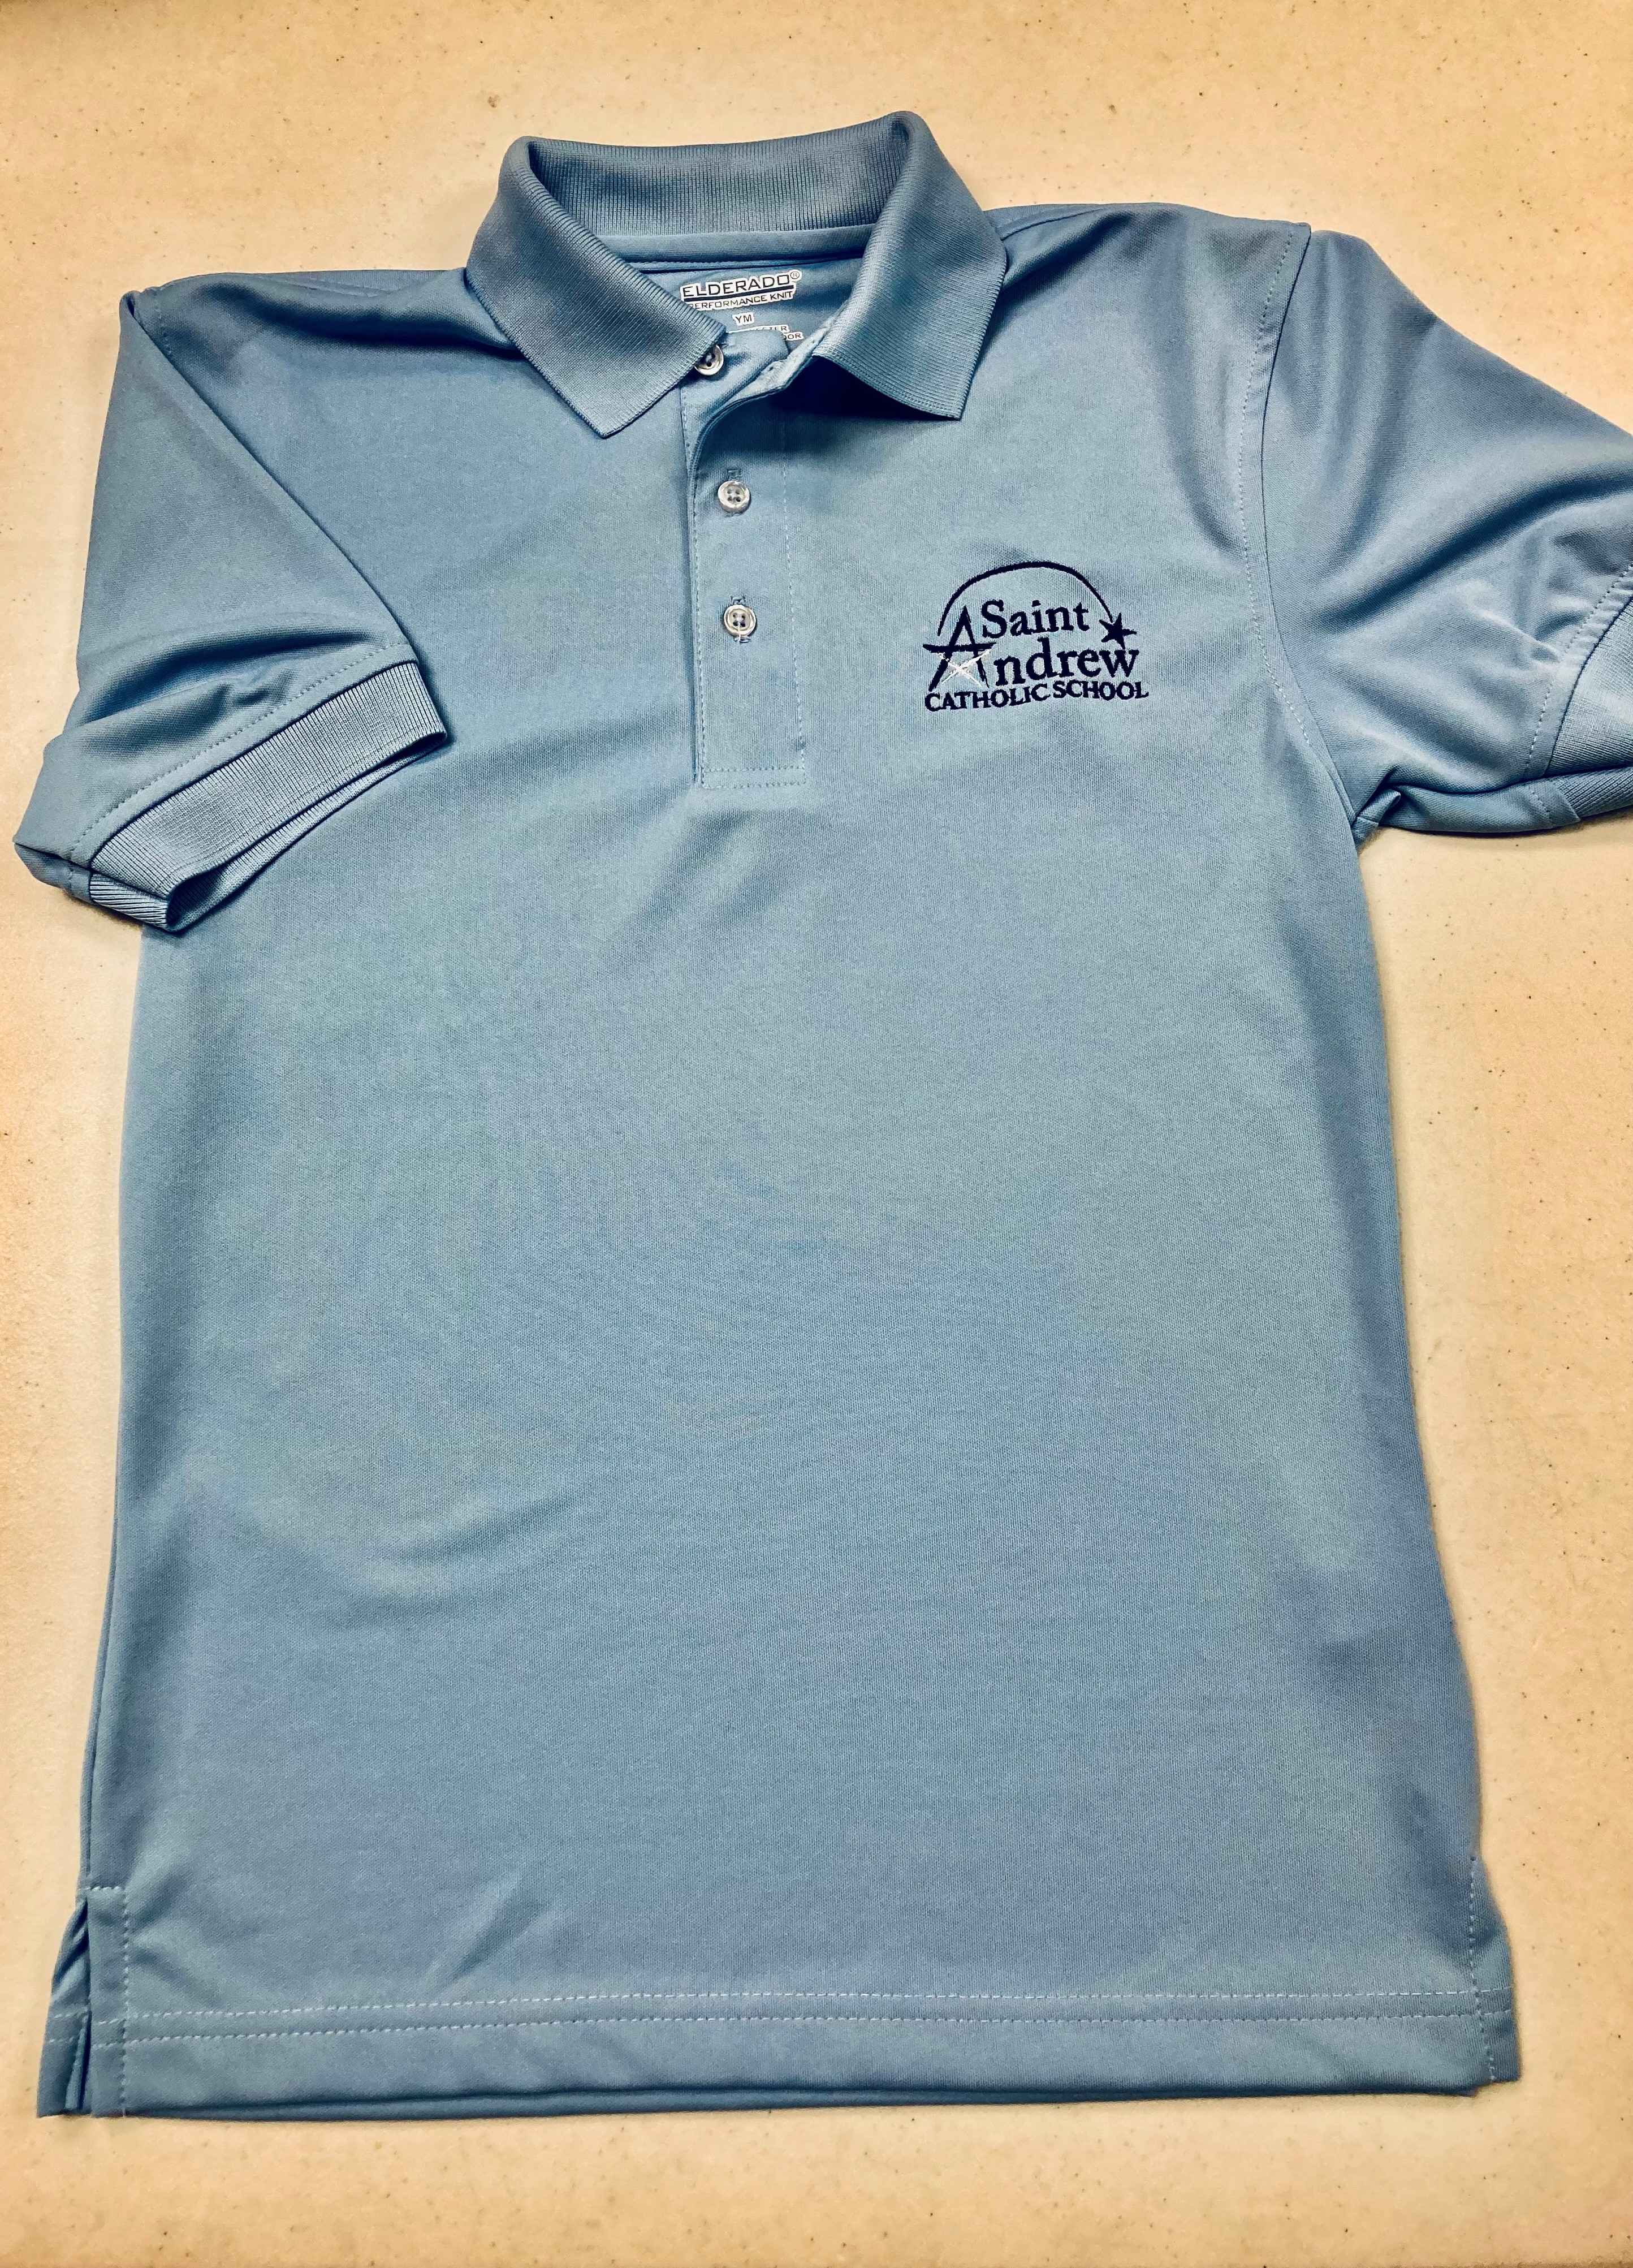 St Andrew Dri Fit Middle School Polo